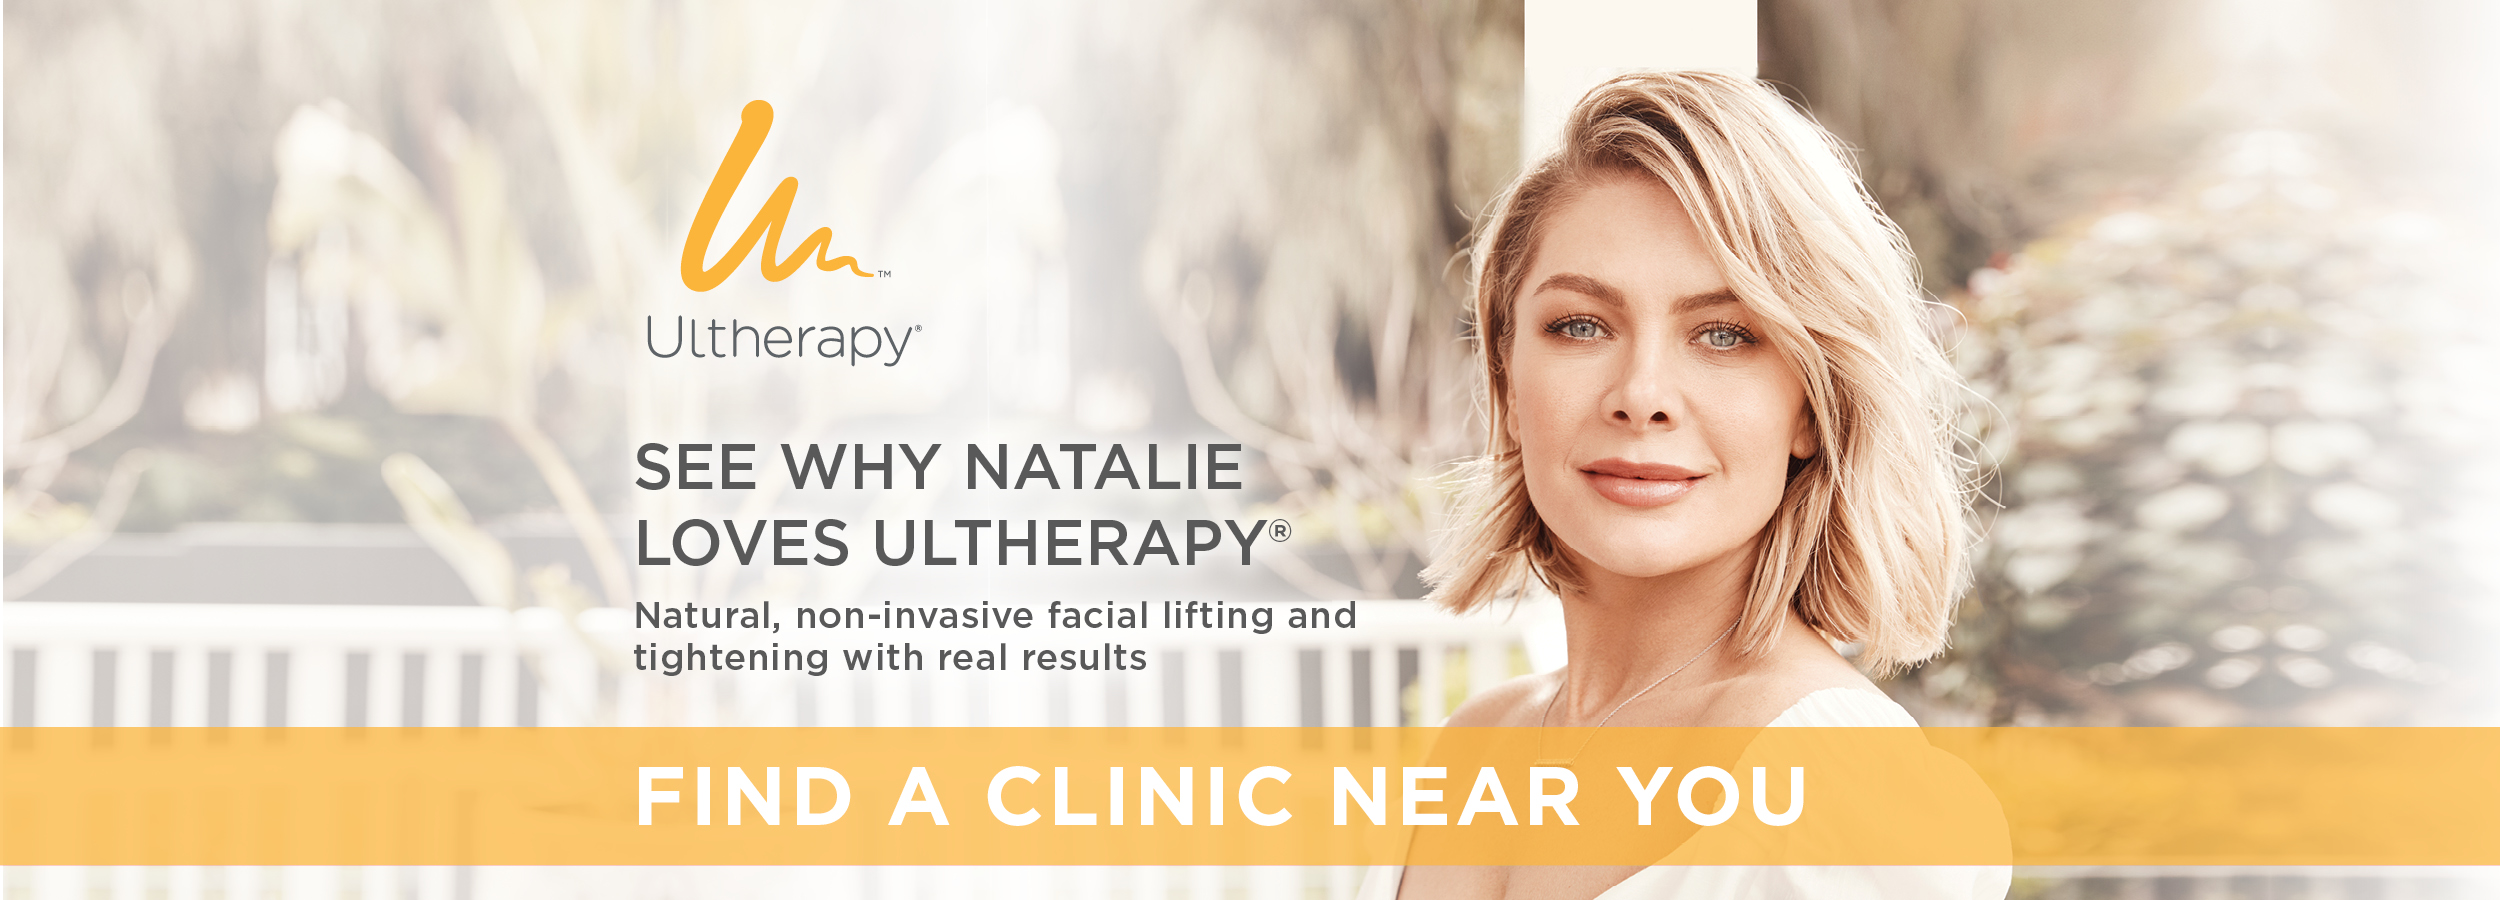 9086MER Ultherapy Web banner2